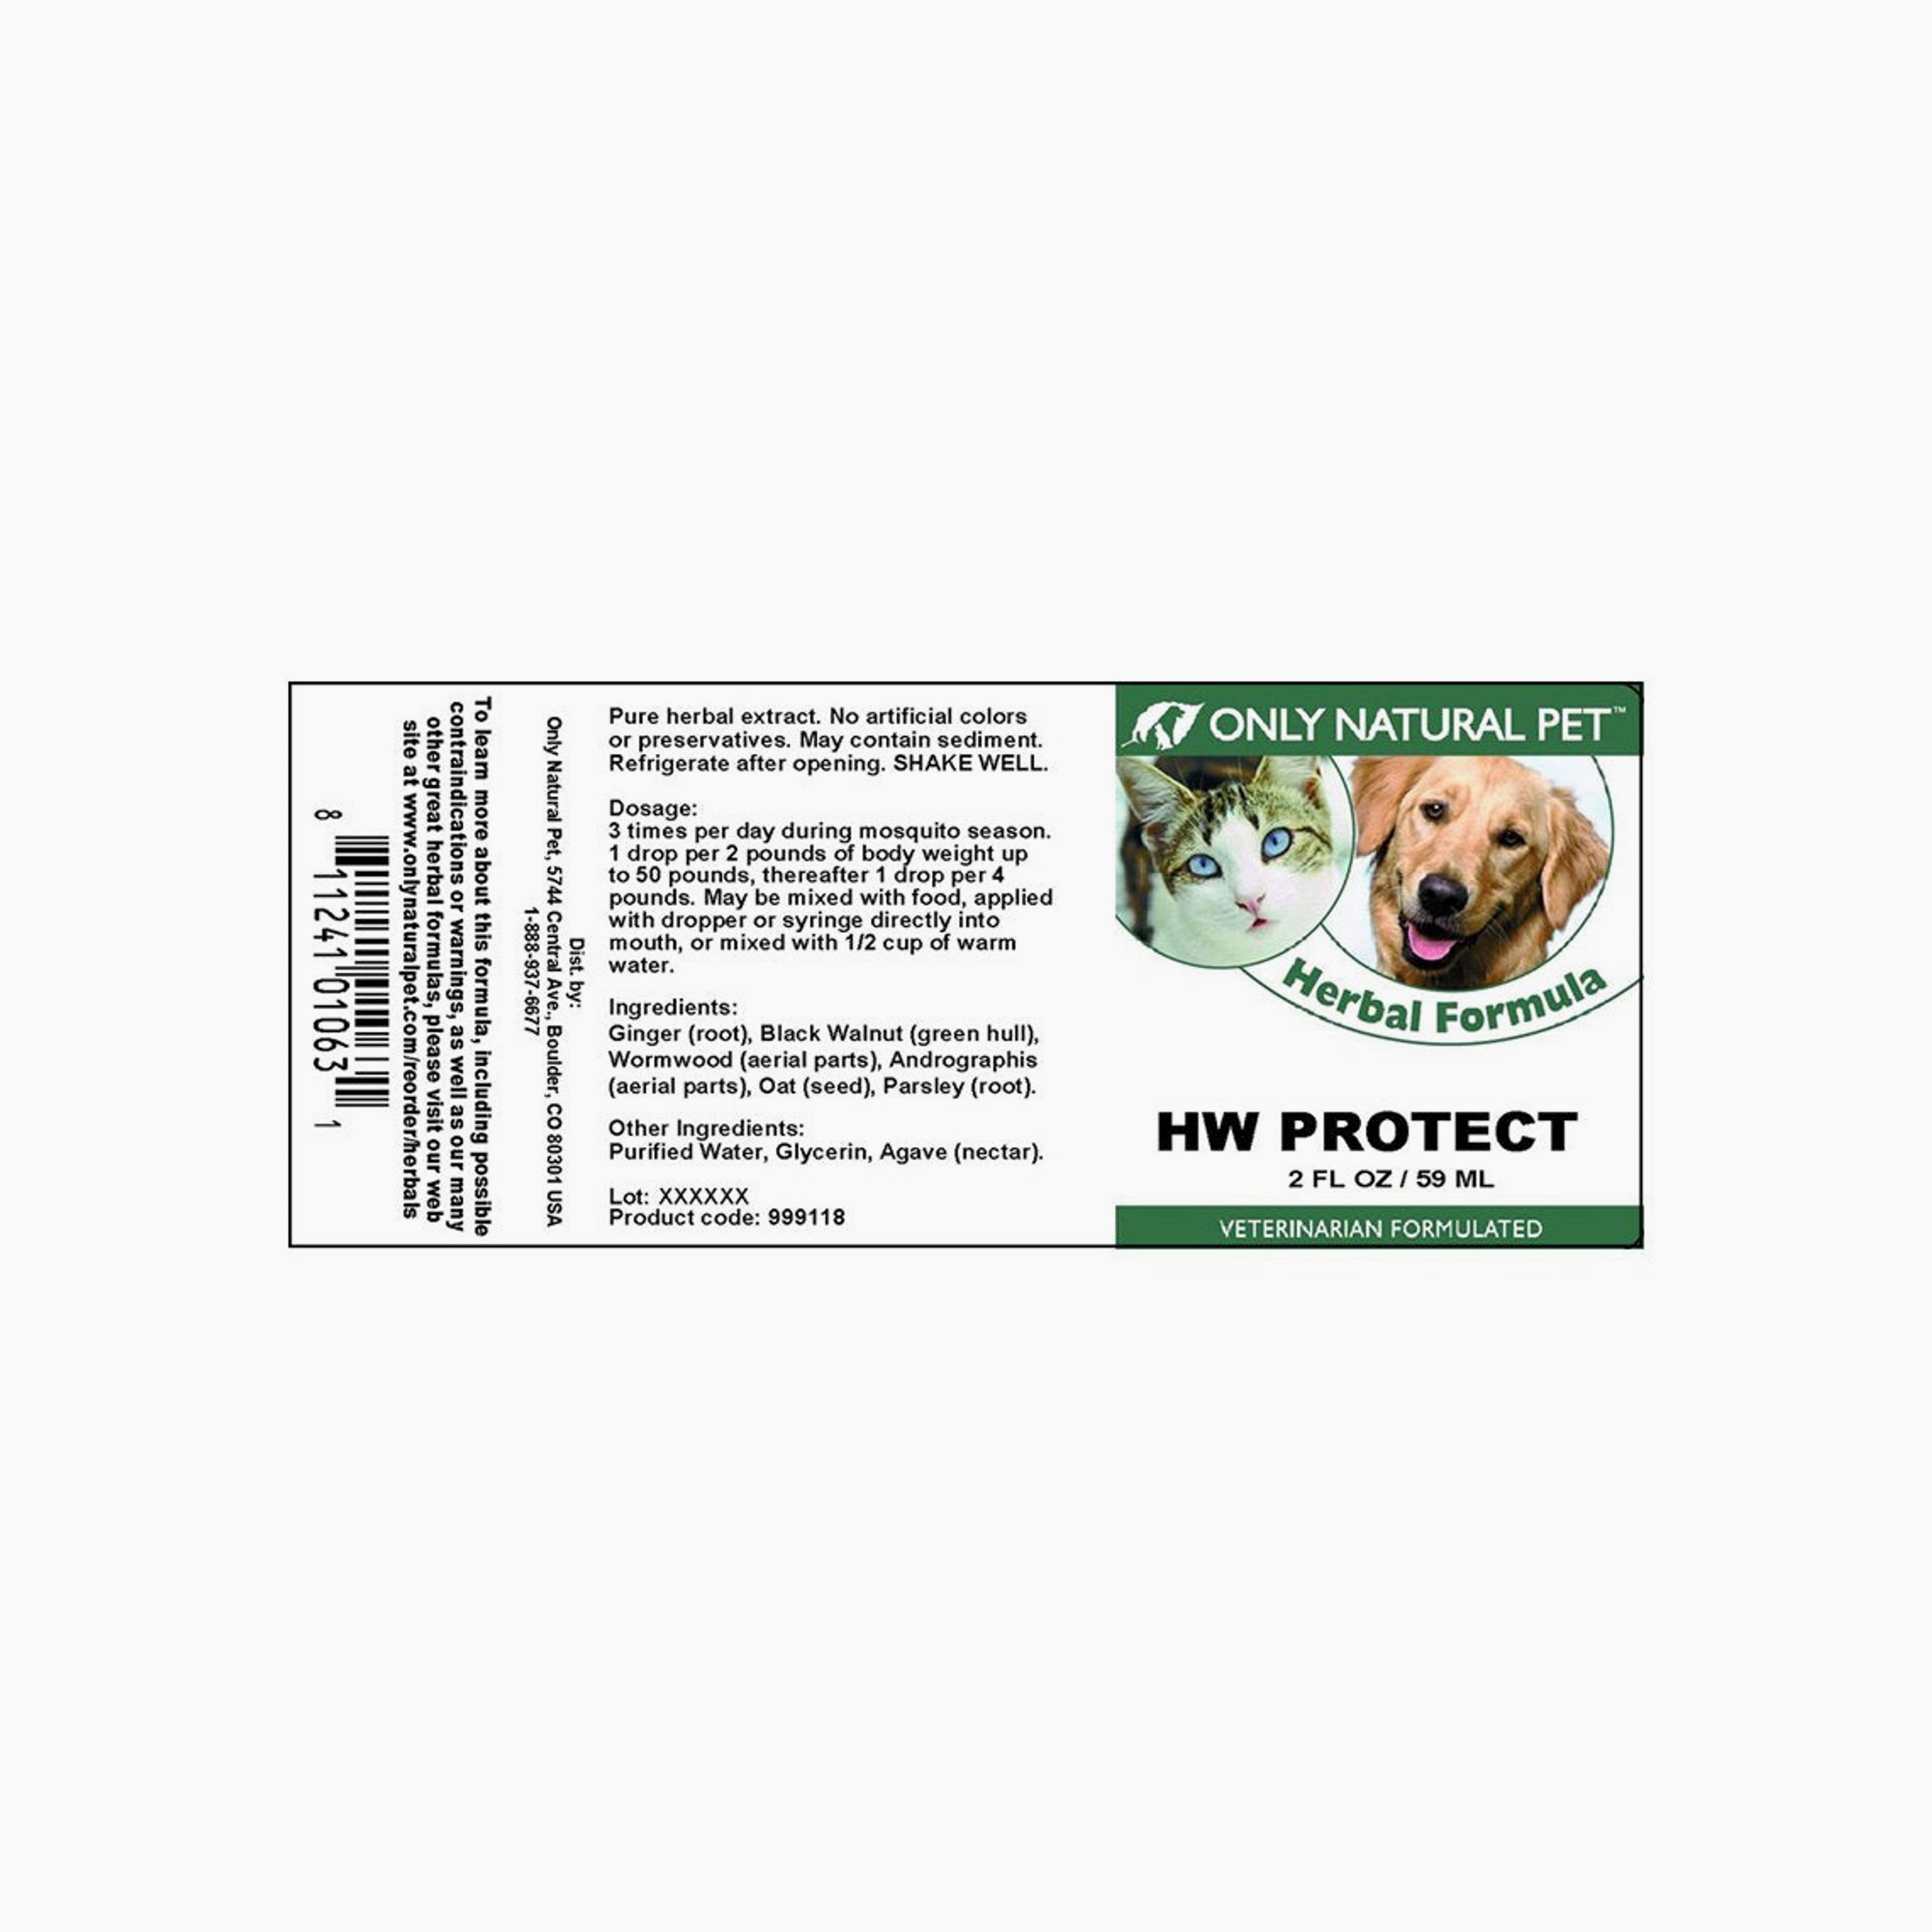 Only Natural Pet HW Protect Liquid Herbal Formula for Dogs & Cats